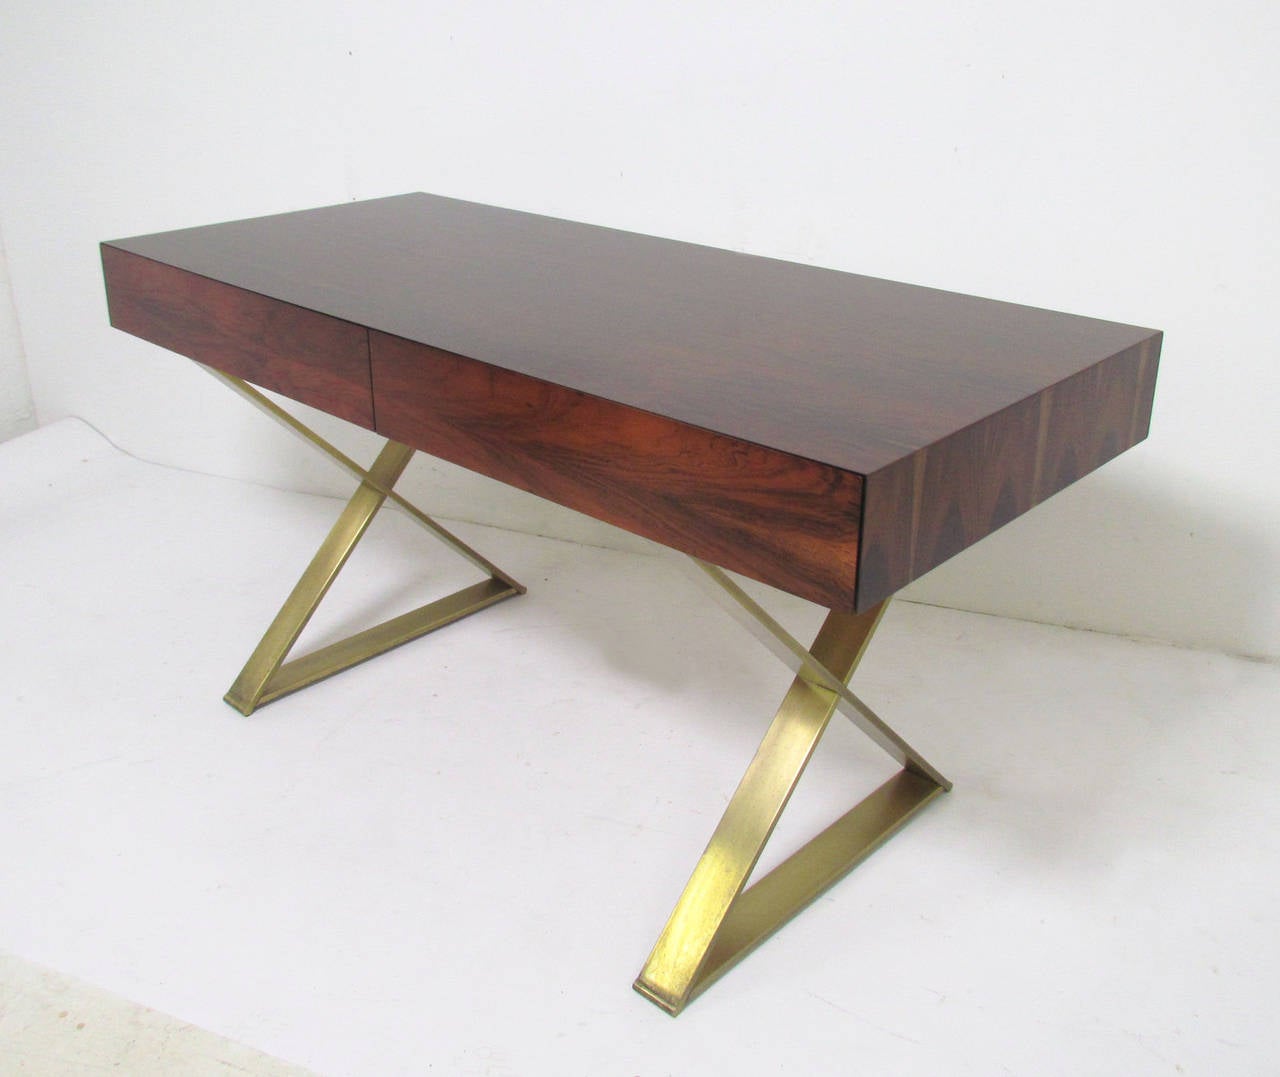 A very fine campaign desk by Milo Baughman in rarely-seen rosewood, X-base legs with bronze finish.  Unlike other models, this design features drawers that are flush mounted to the desk top, with no visible handles.  Drawers open by finger pulls